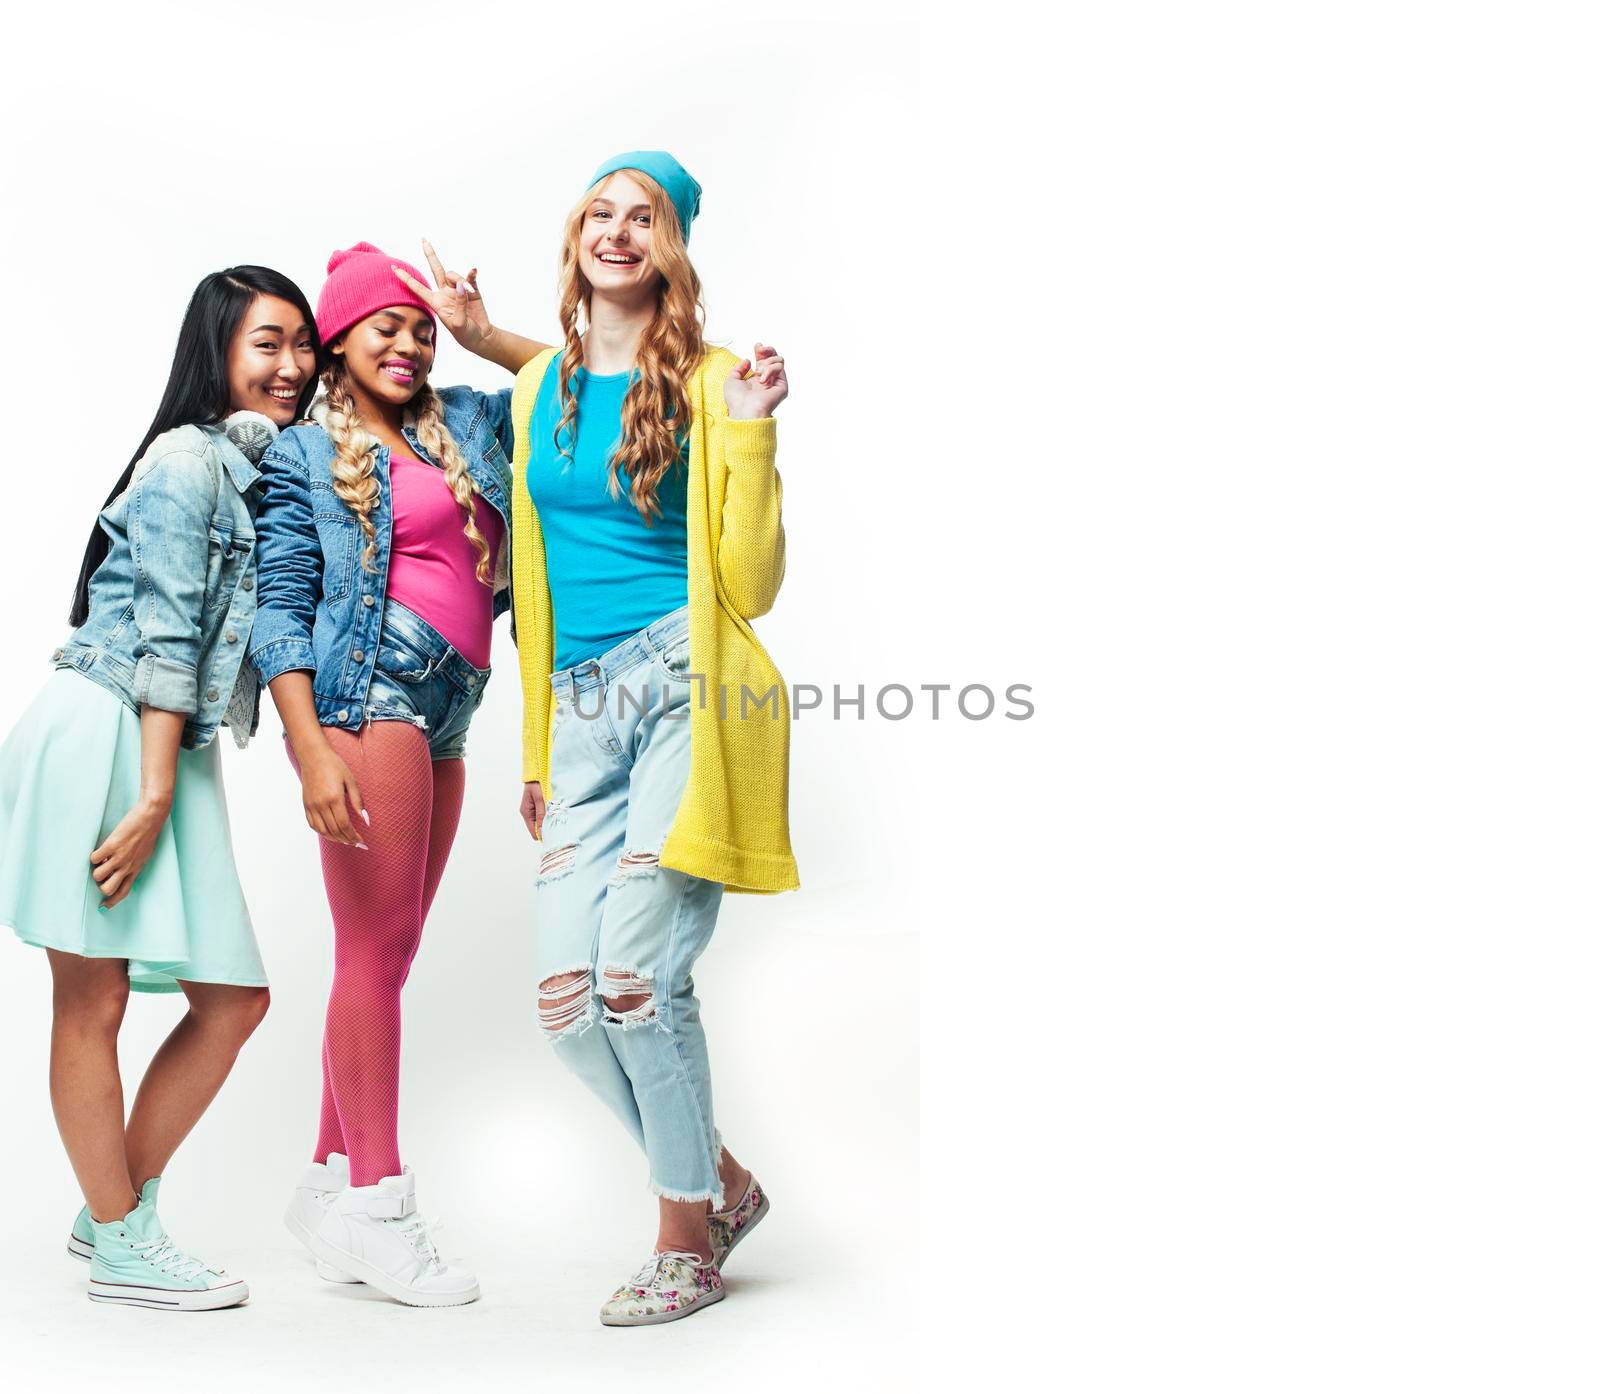 diverse nation girls group, teenage friends company cheerful having fun, happy smiling, cute posing isolated on white background, lifestyle people concept close up